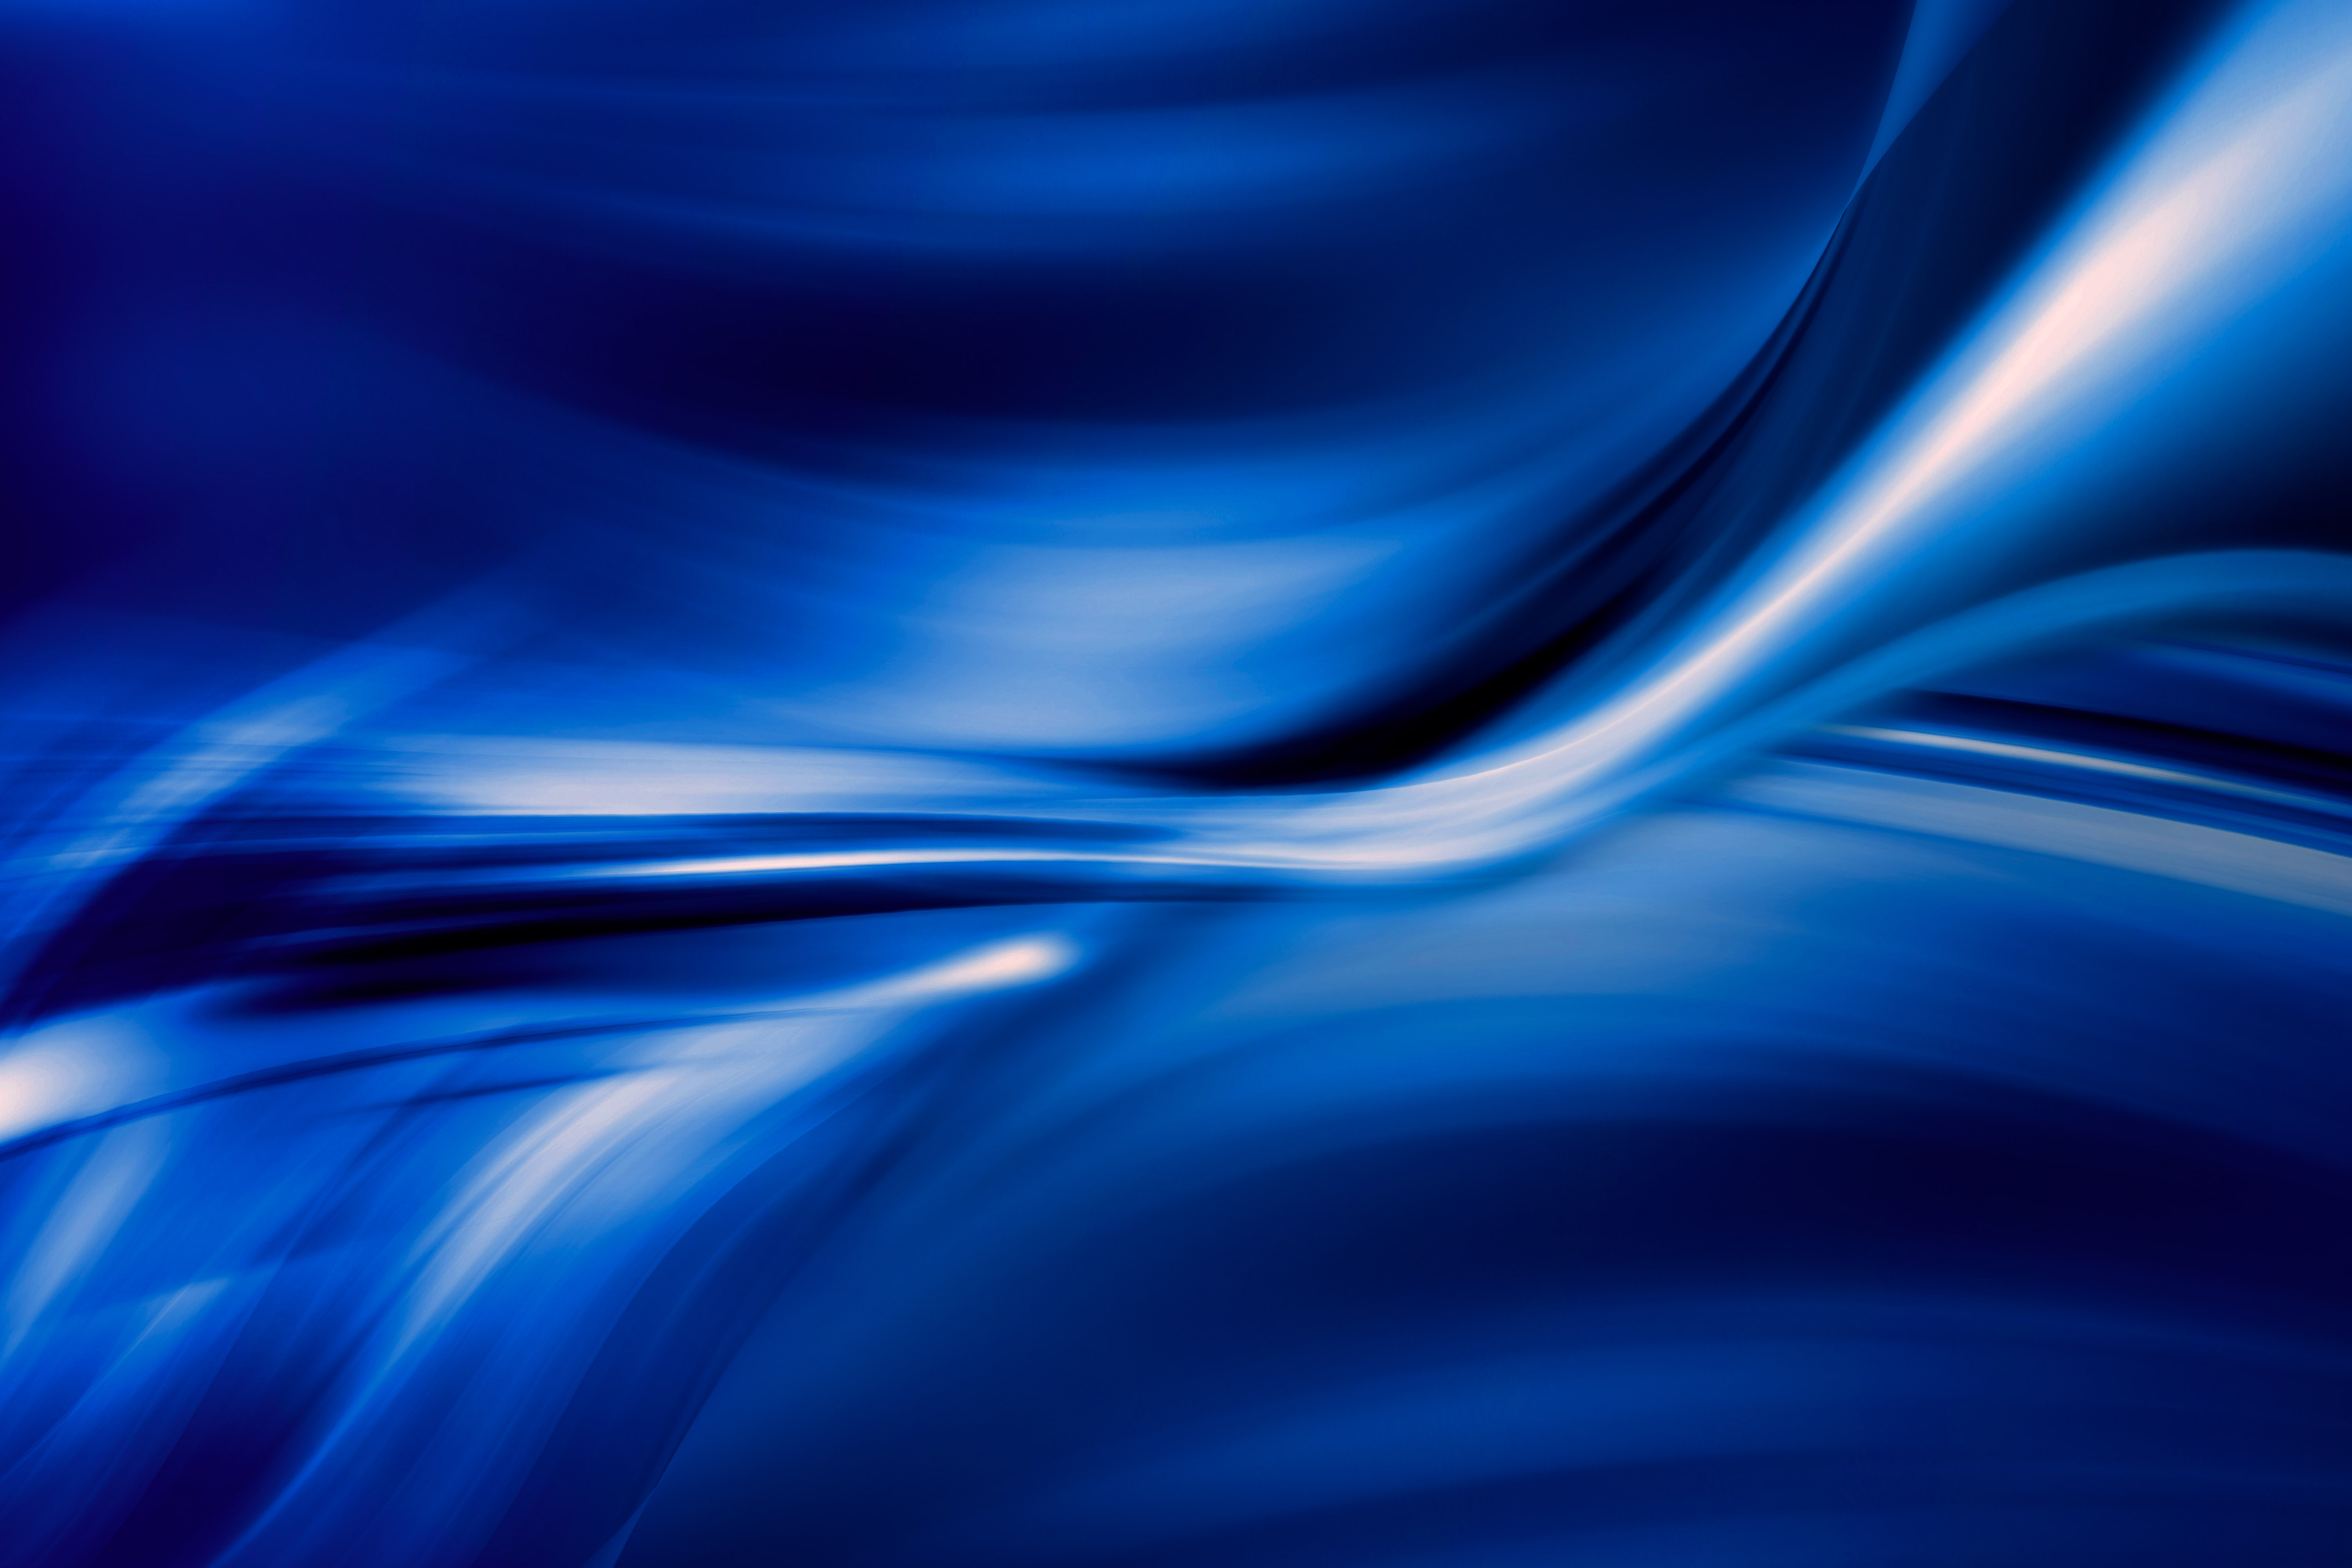 Light and dark abstract blue background | www ...